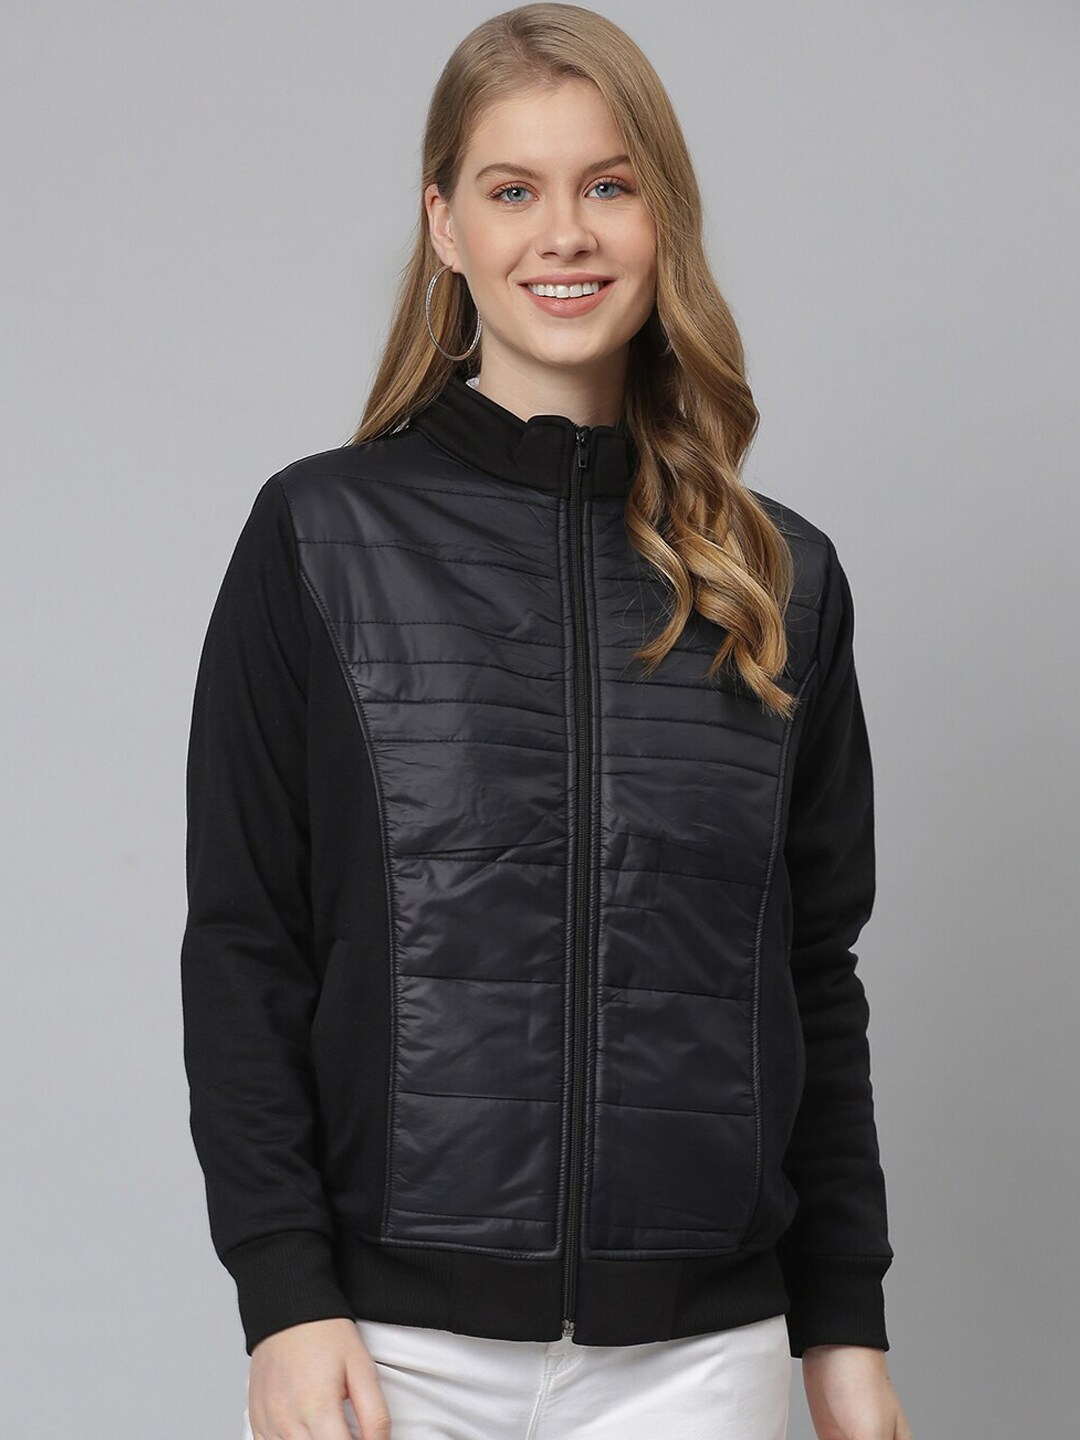 Campus Sutra Women Black Bomber Jacket Price in India